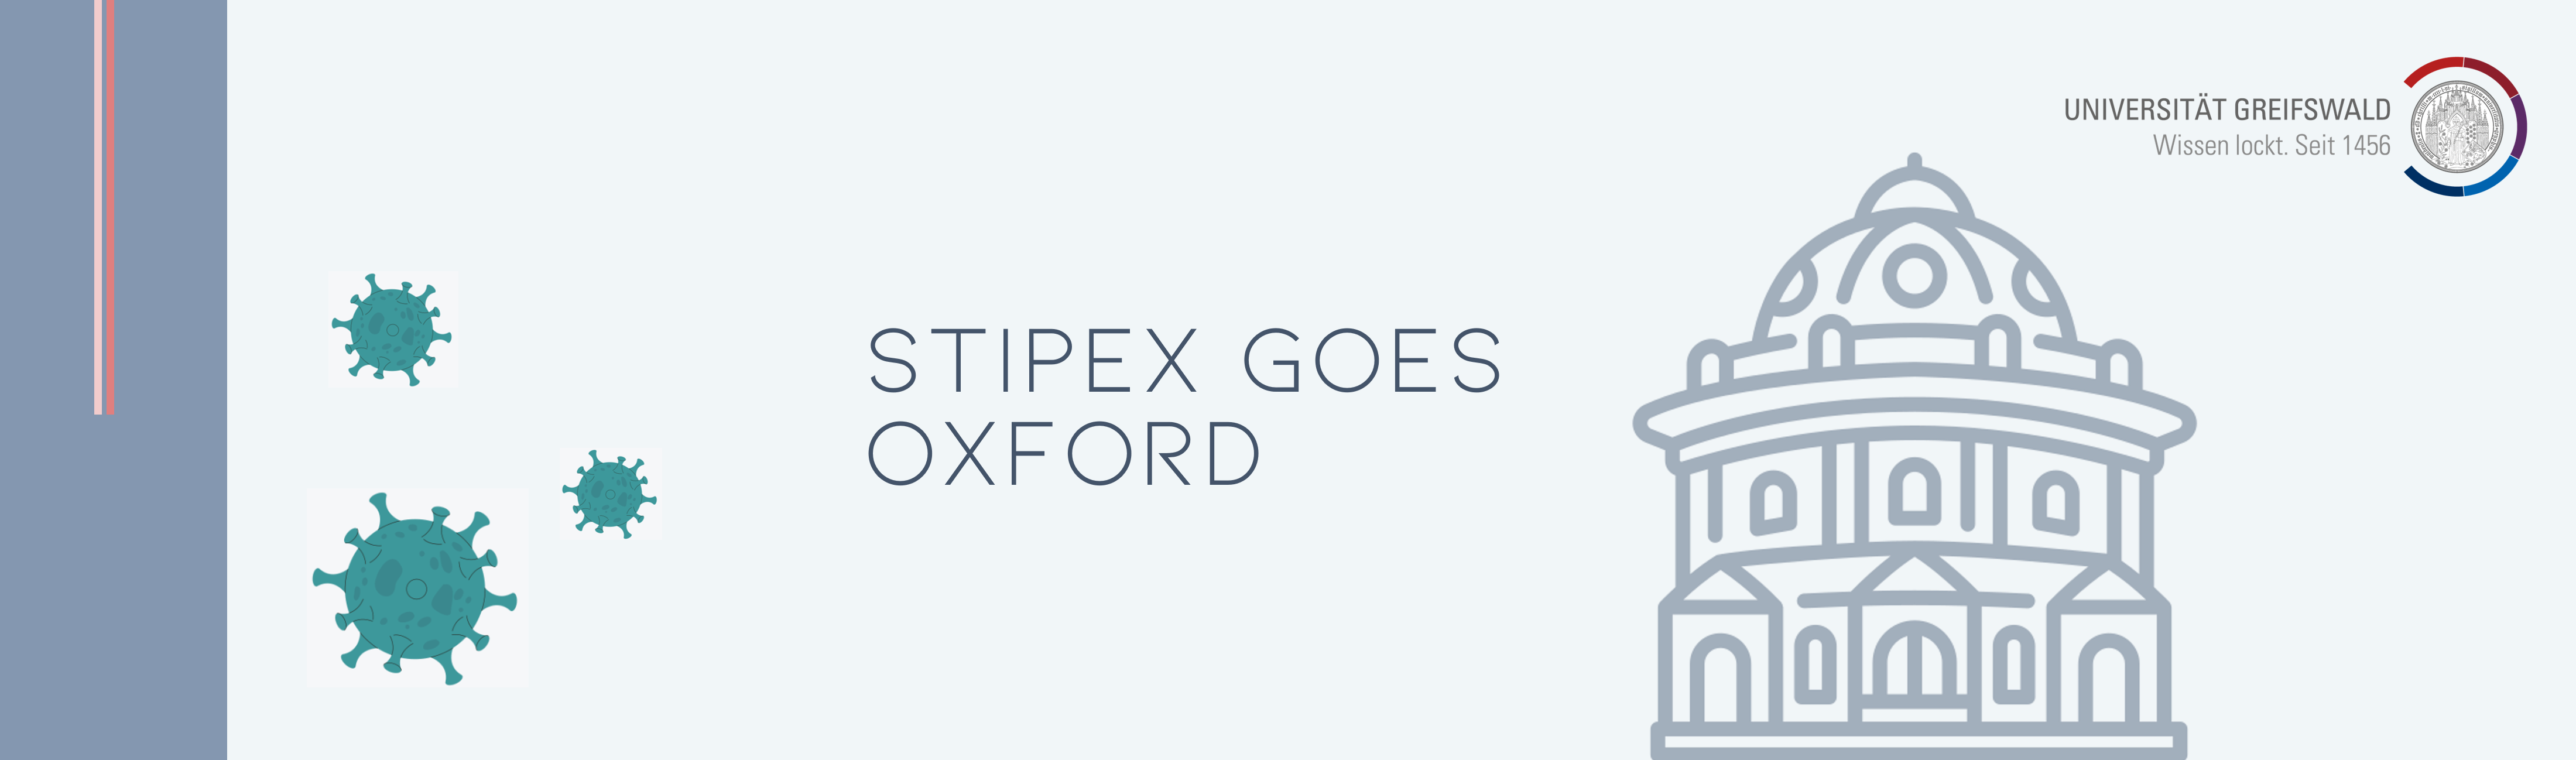 StiPEx goes Oxford